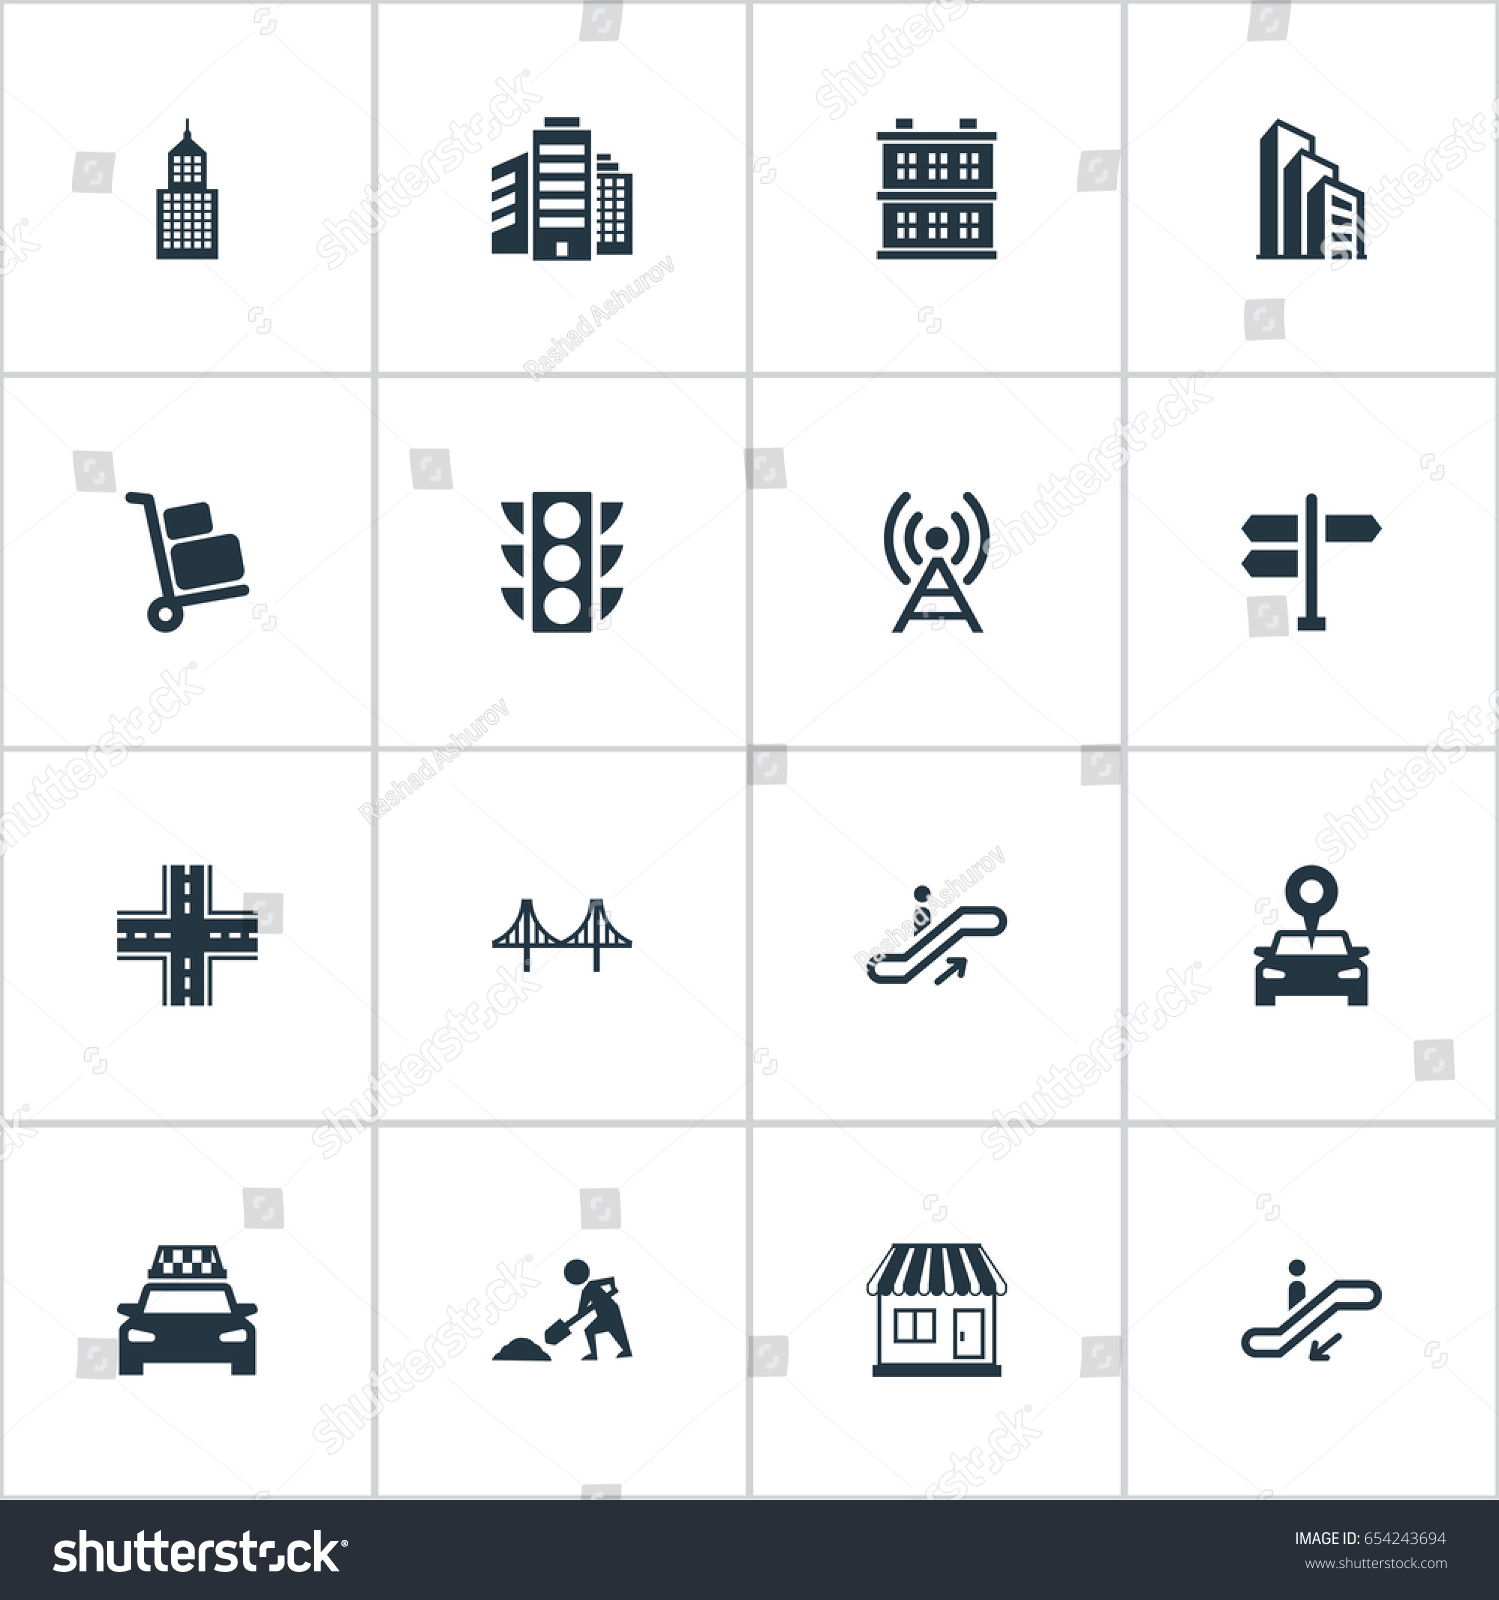 Vector Illustration Set Simple City Icons Stock Vector 654243694